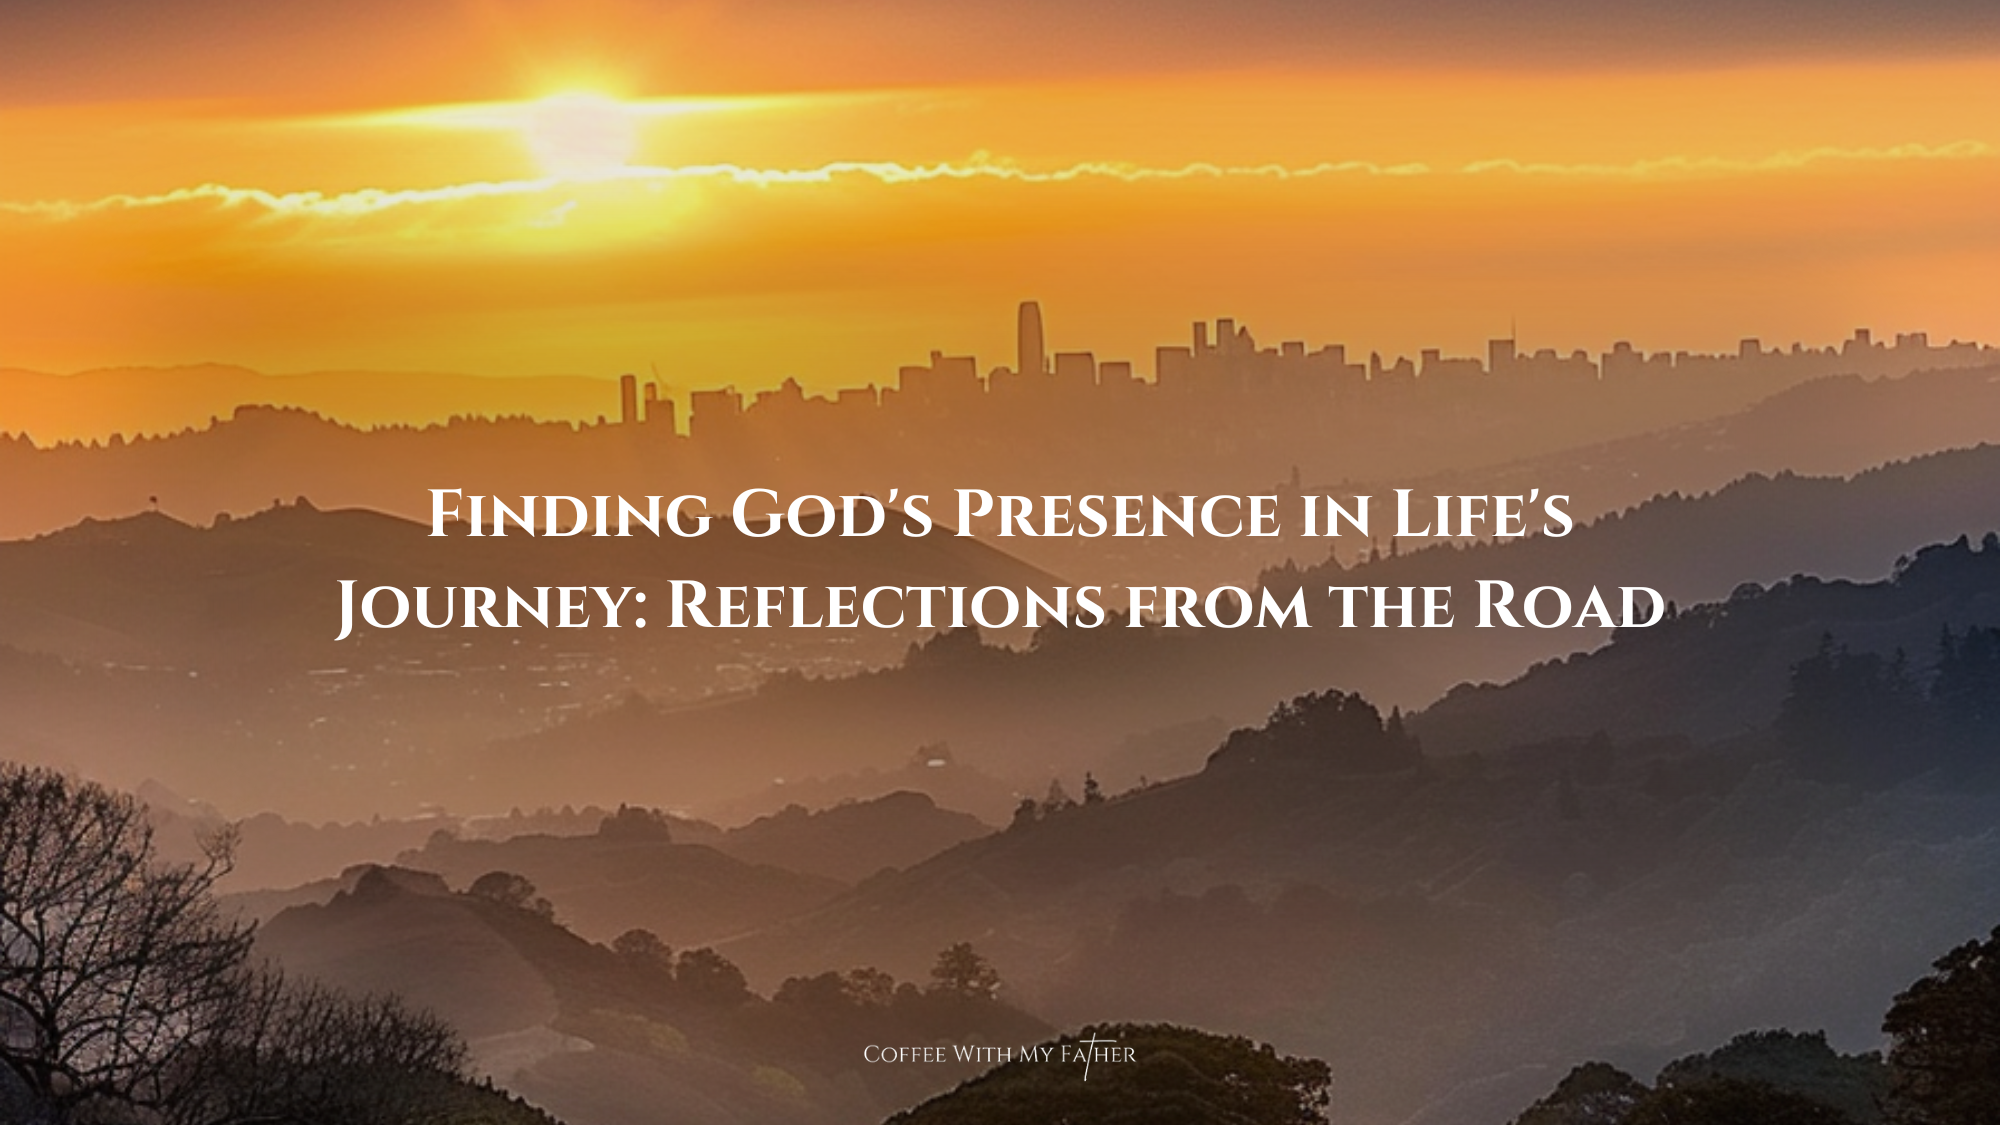 Finding God's Presence in Life's Journey: Reflections from the Road